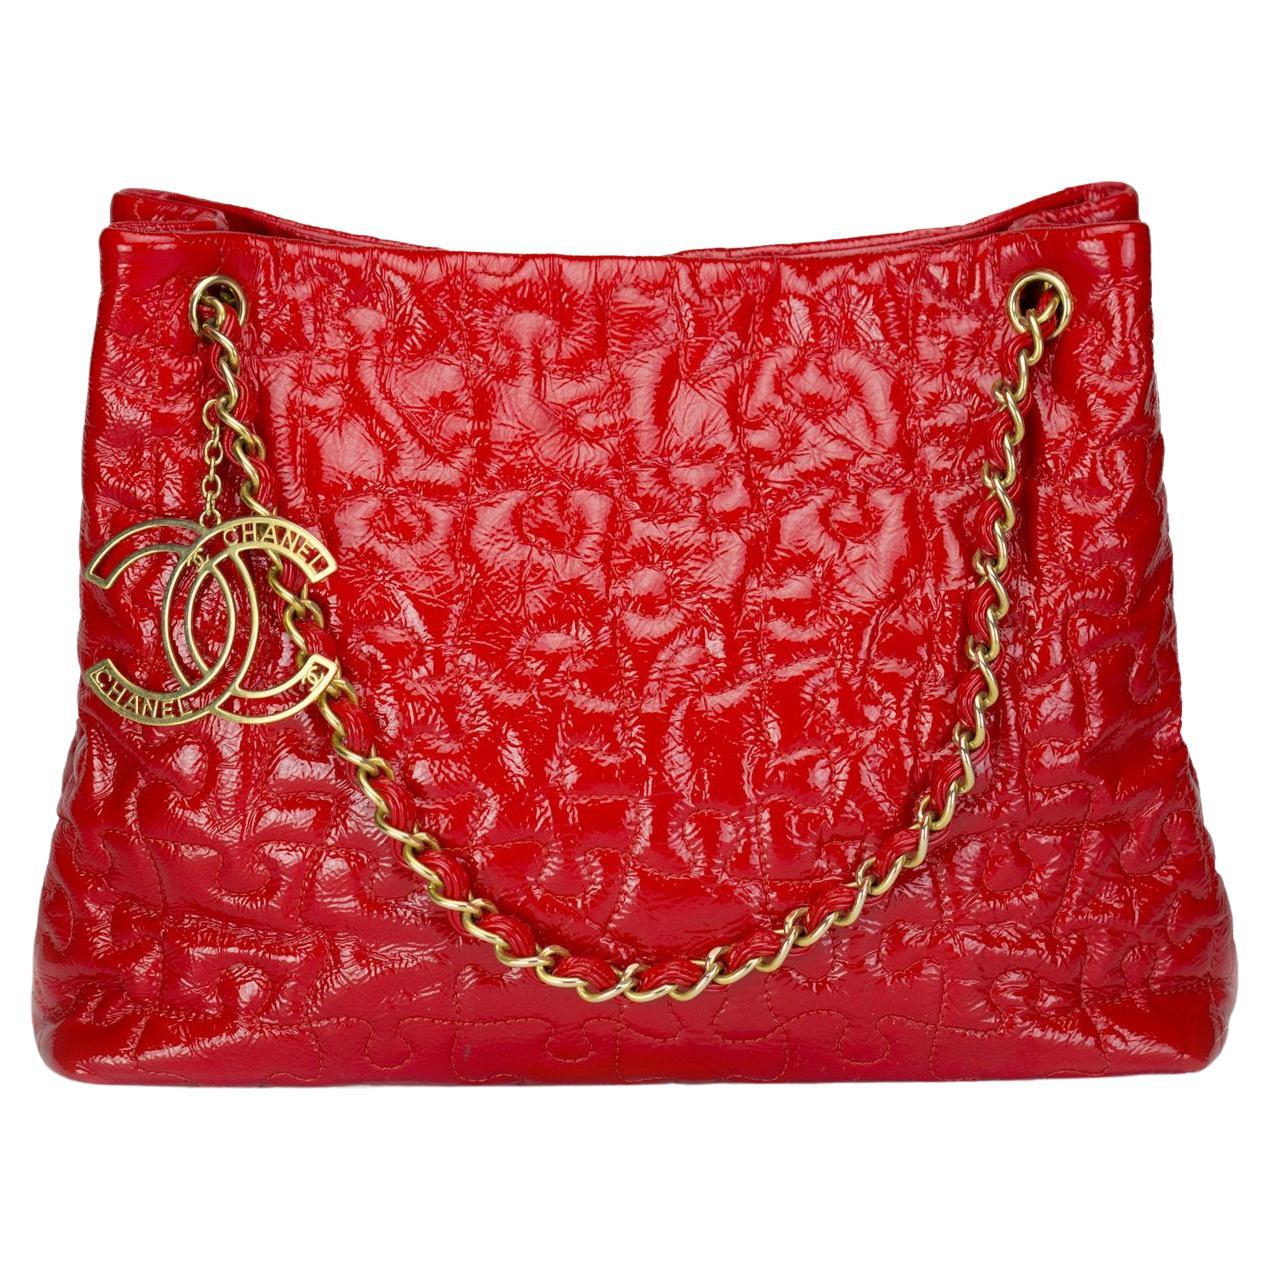 Chanel Rare Vintage Red Puzzle Piece Patent Tote For Sale at